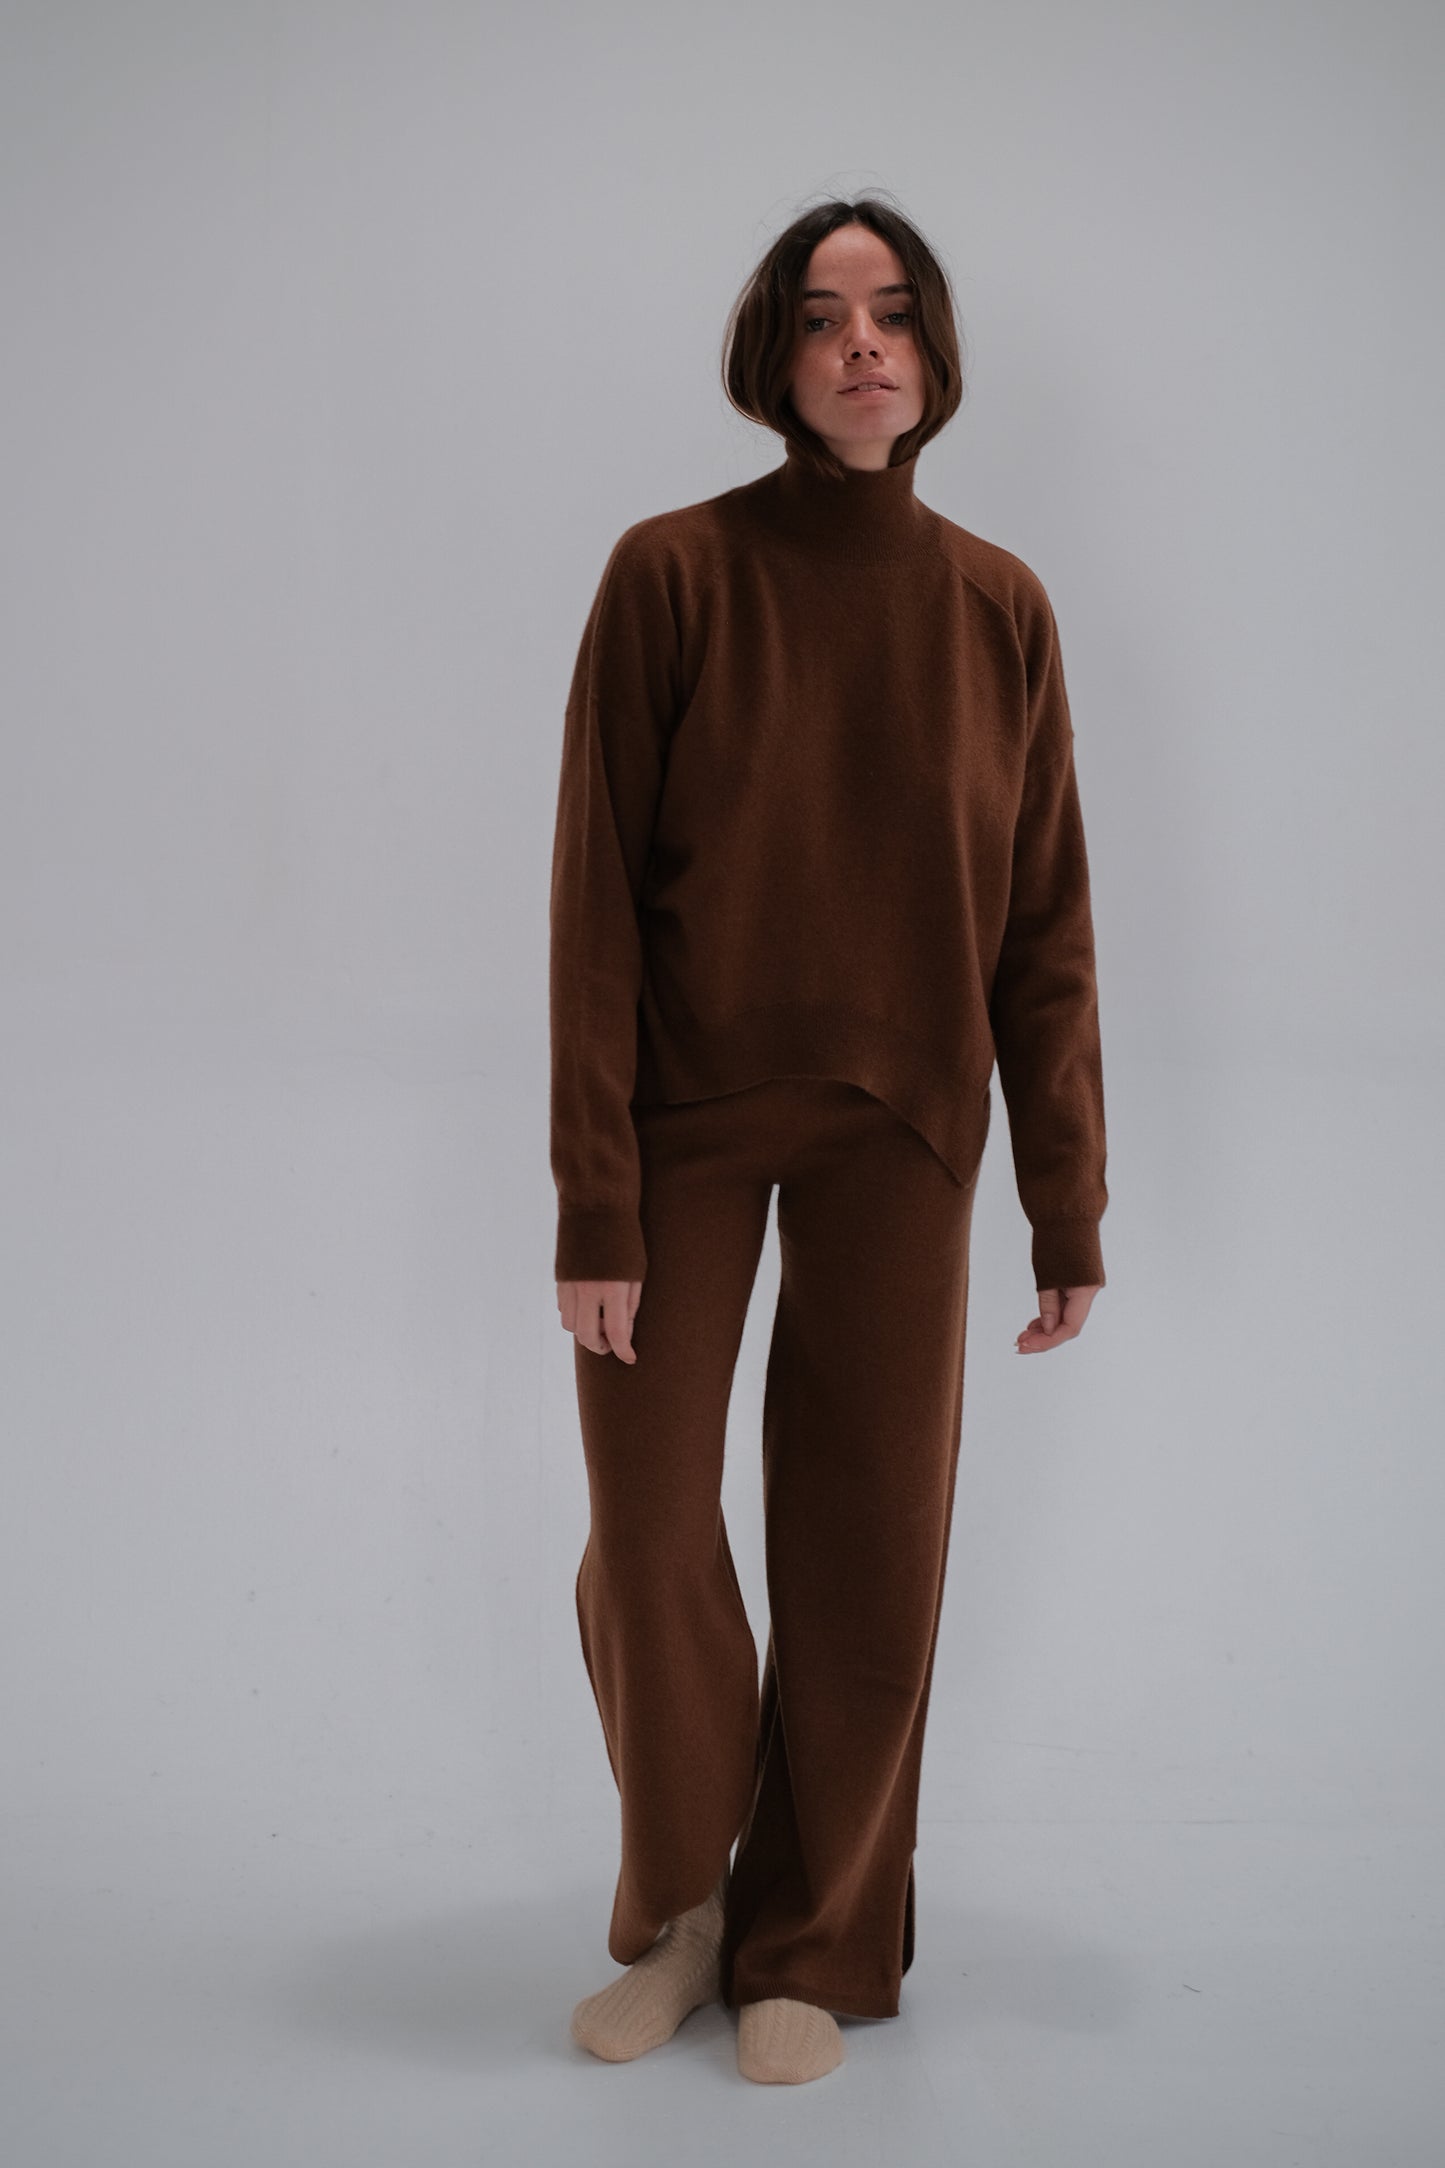 high neck wool sweater in camel